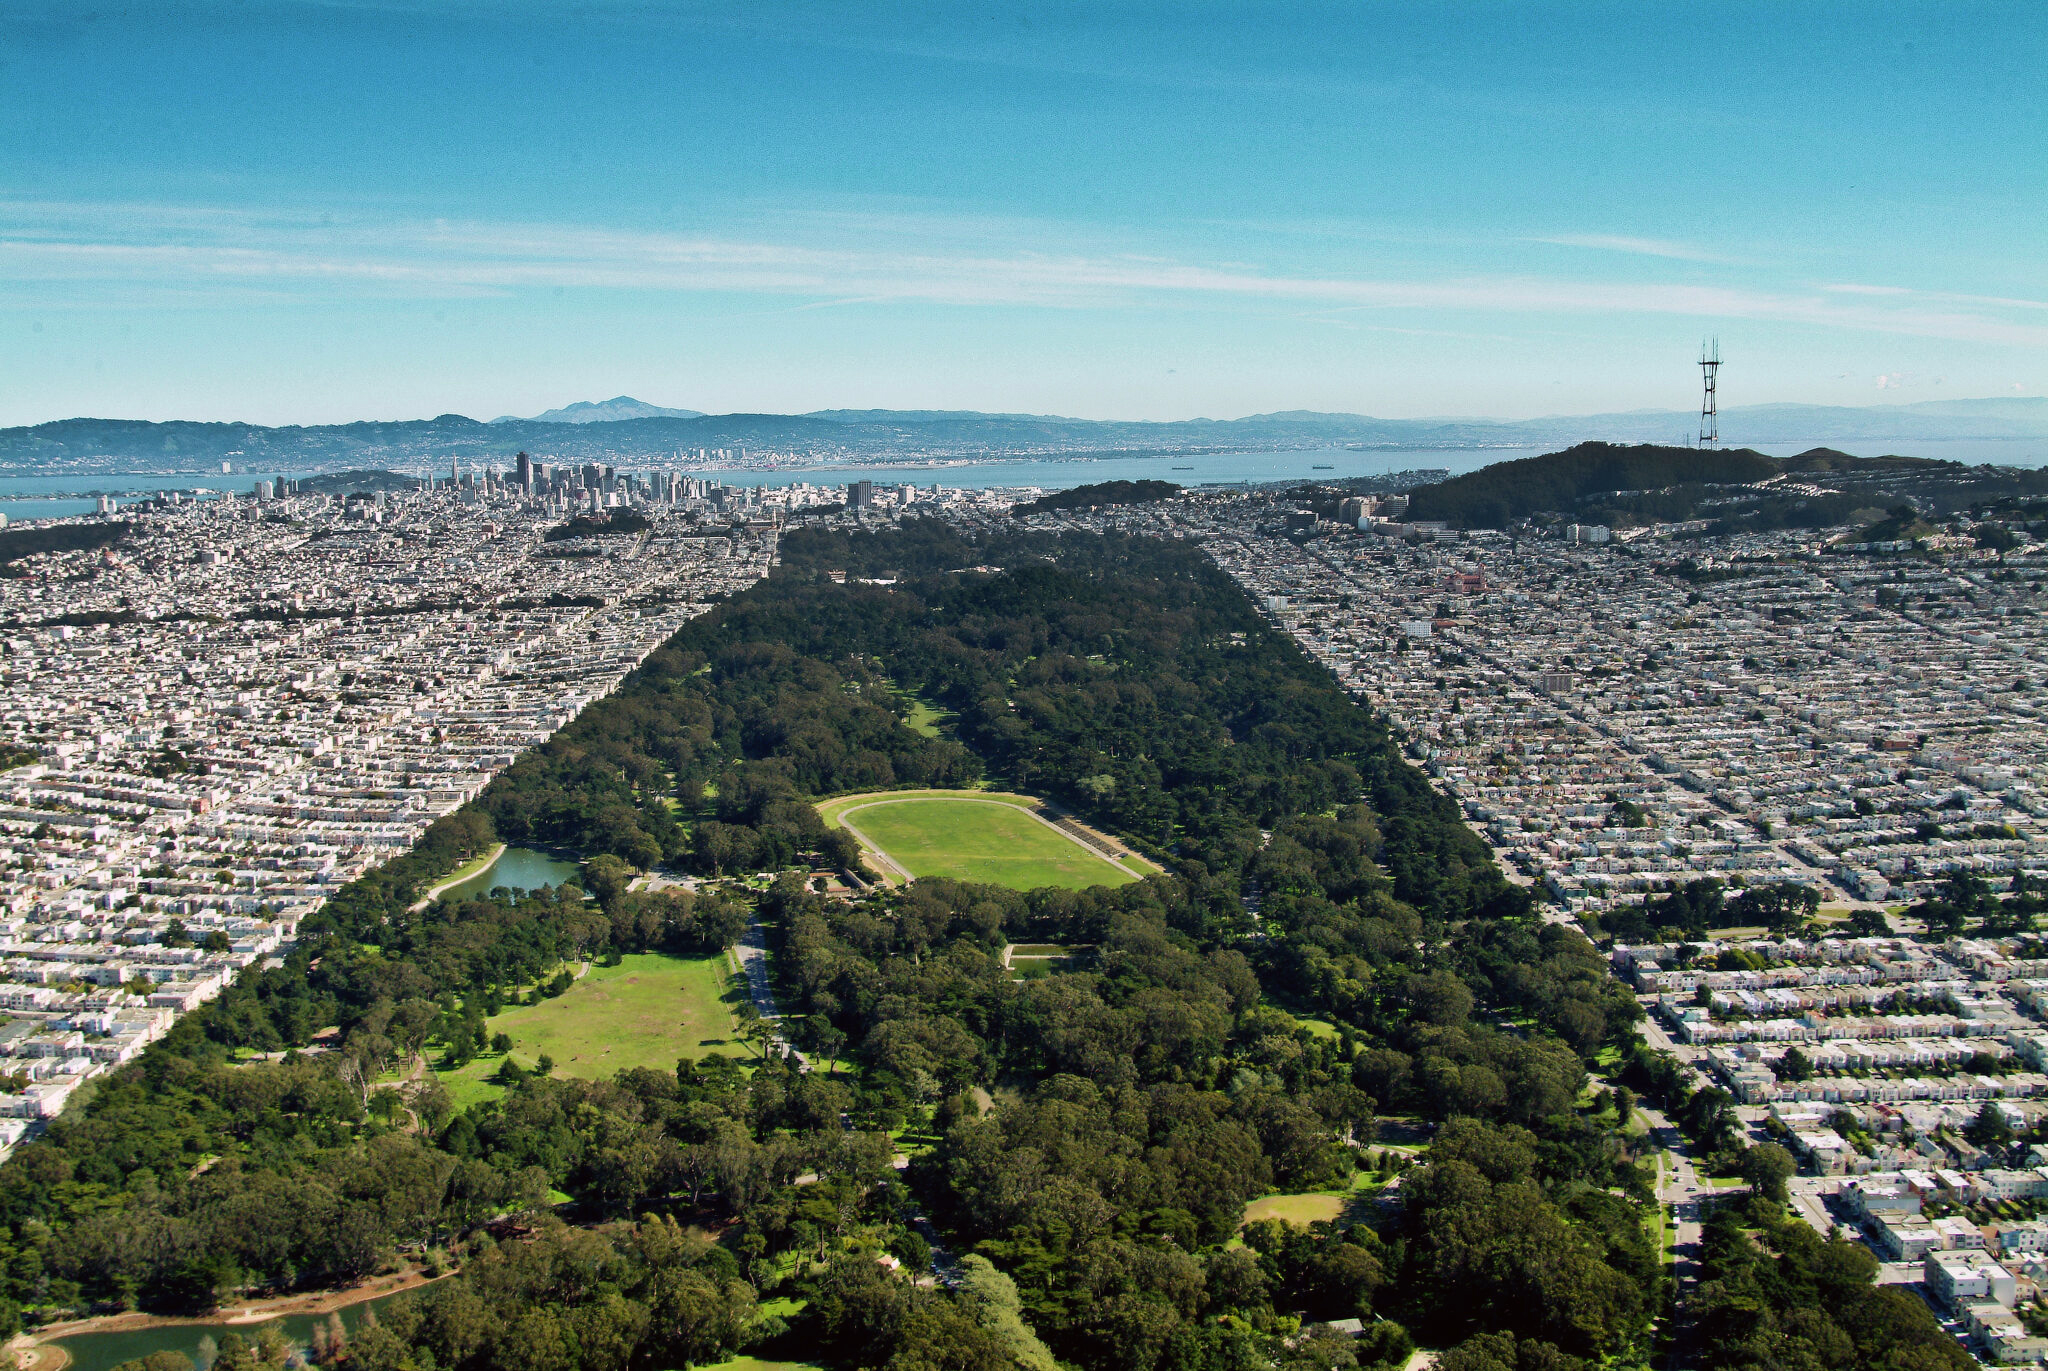 Golden Gate Park is so beautiful, Snopes had to prove it's real